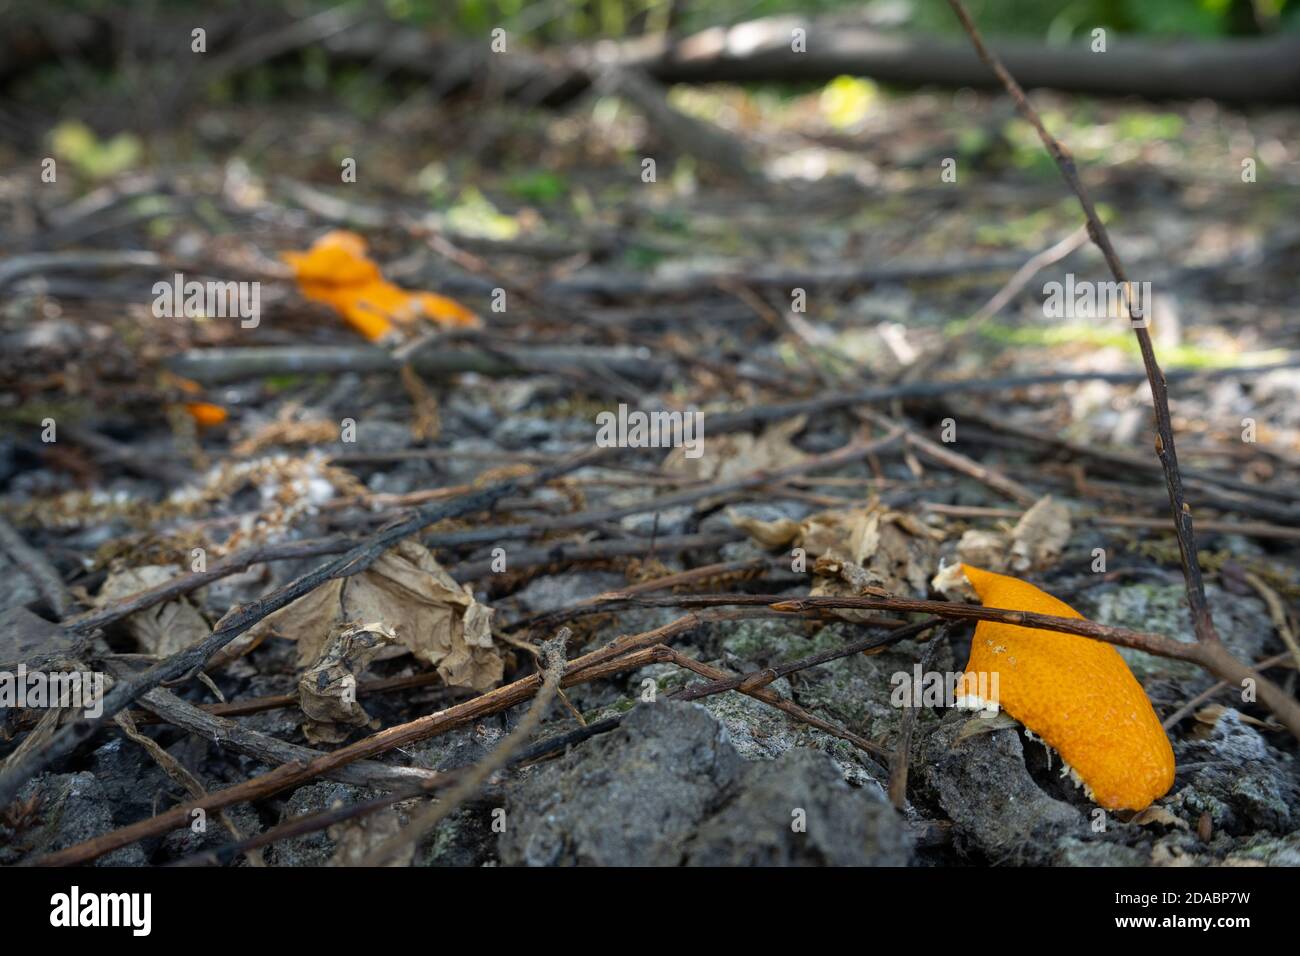 Two pieces of orange peel discarded and peeled onto outside floor with grey twigs and tree branches Stock Photo